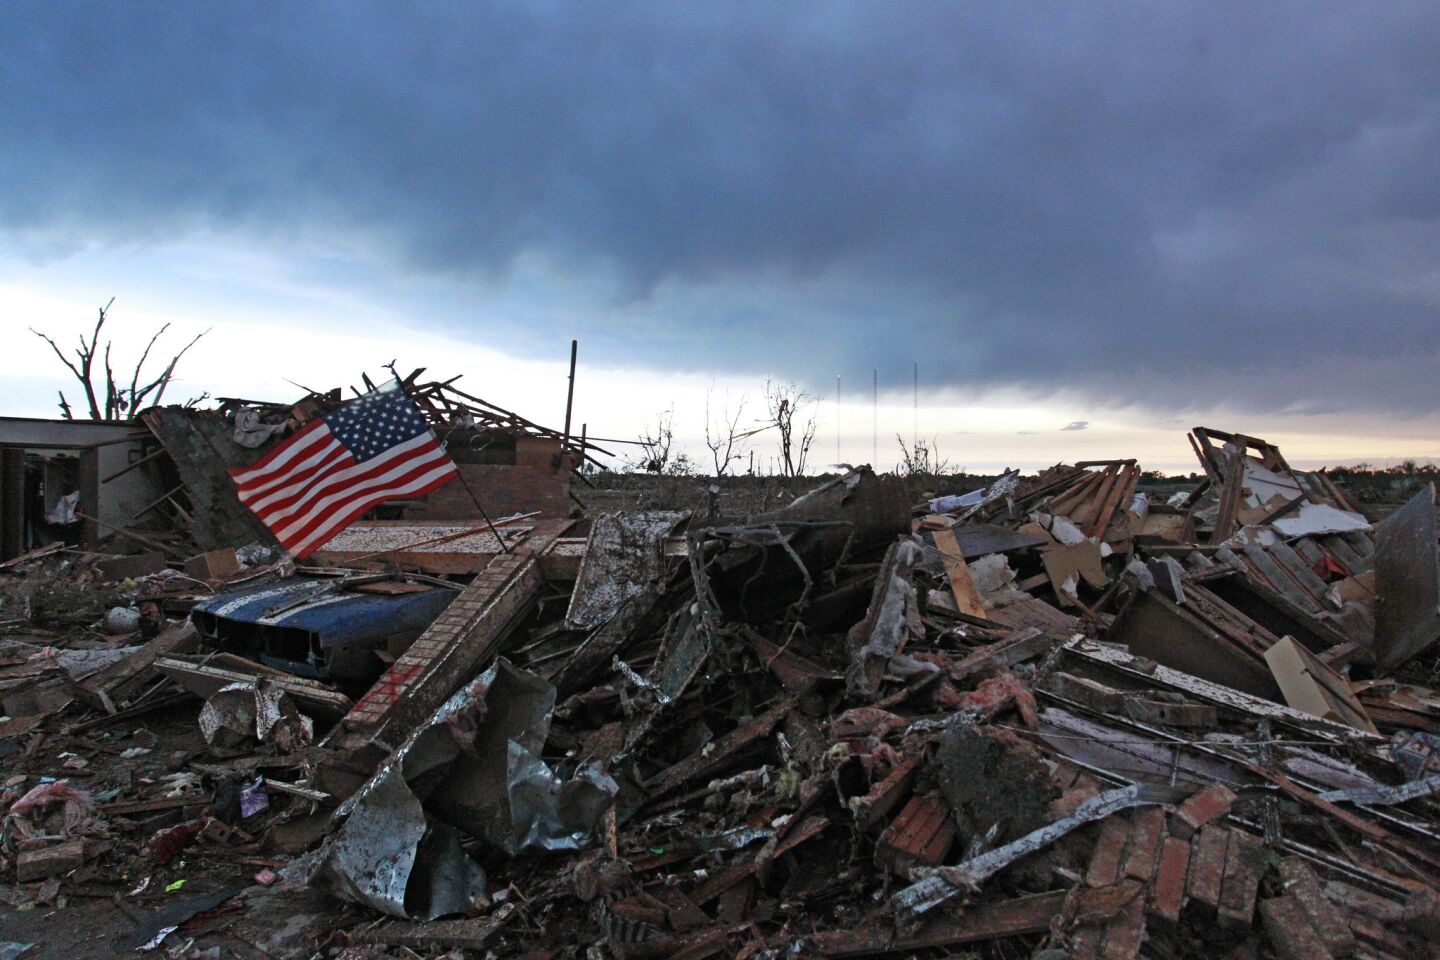 An American flag blows in the wind at sunrise atop the rubble of a destroyed home a day after a tornado moved through Moore, Okla.